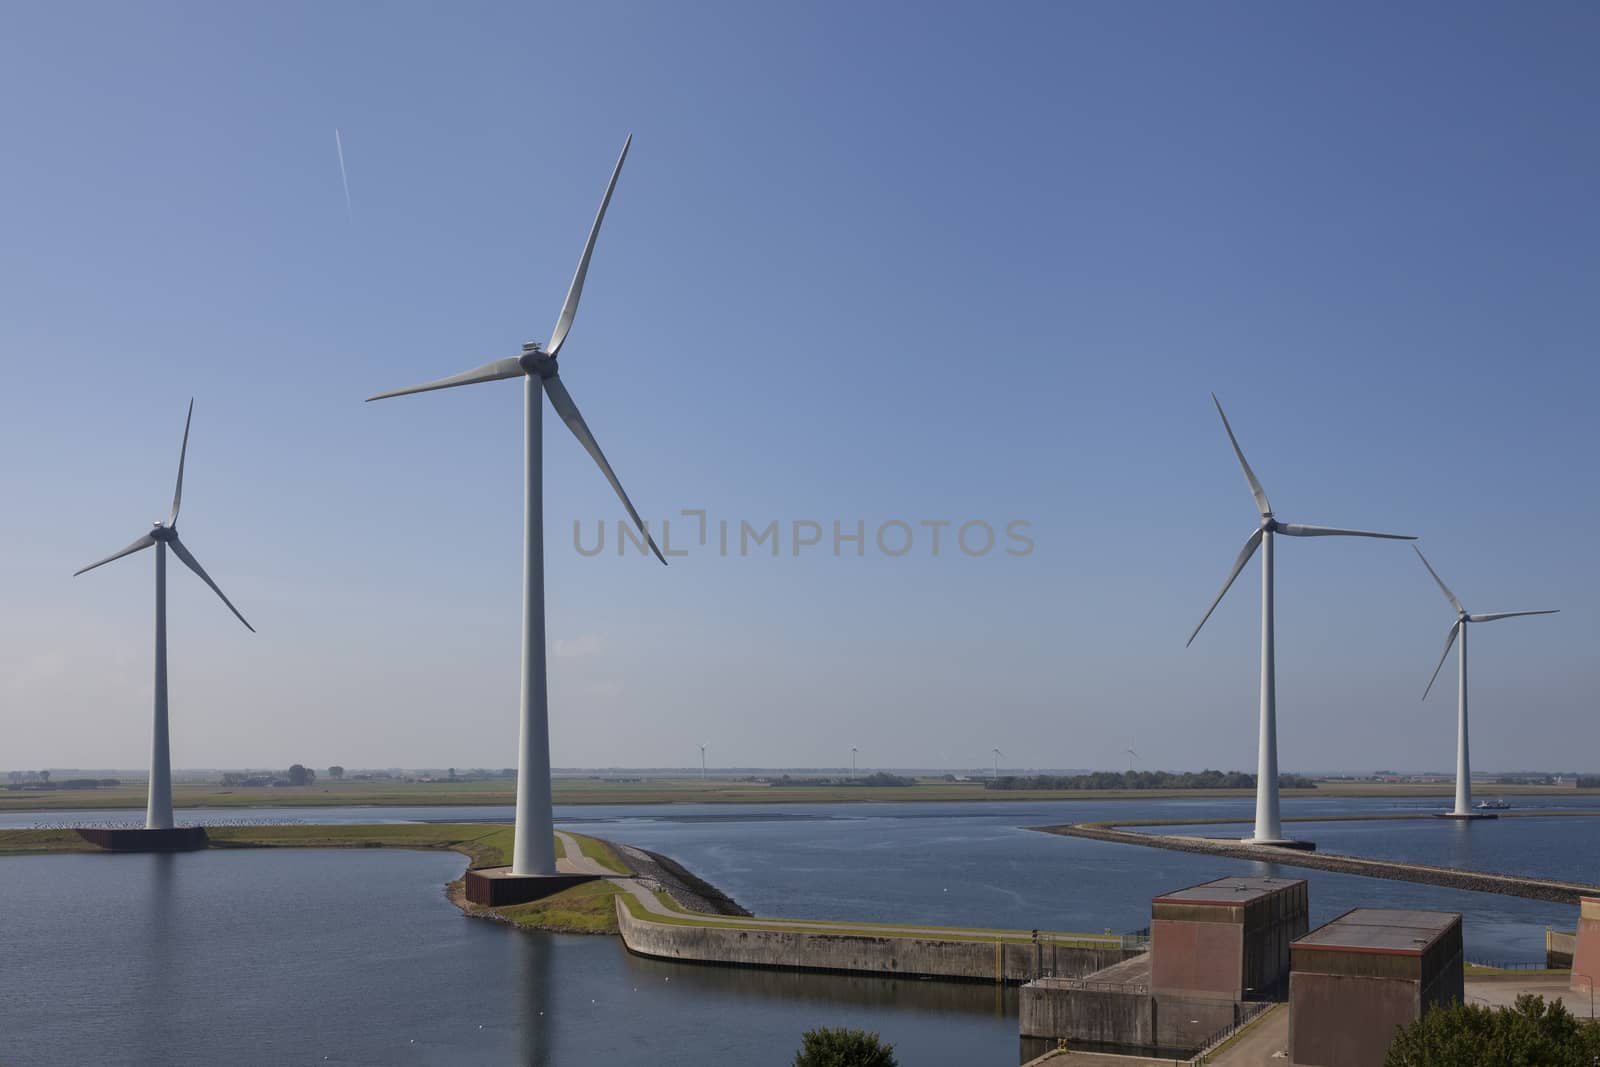 Volkeraksluizen lake krammer. Drone photograpy from the delta works in noord brabant in the Netherlands